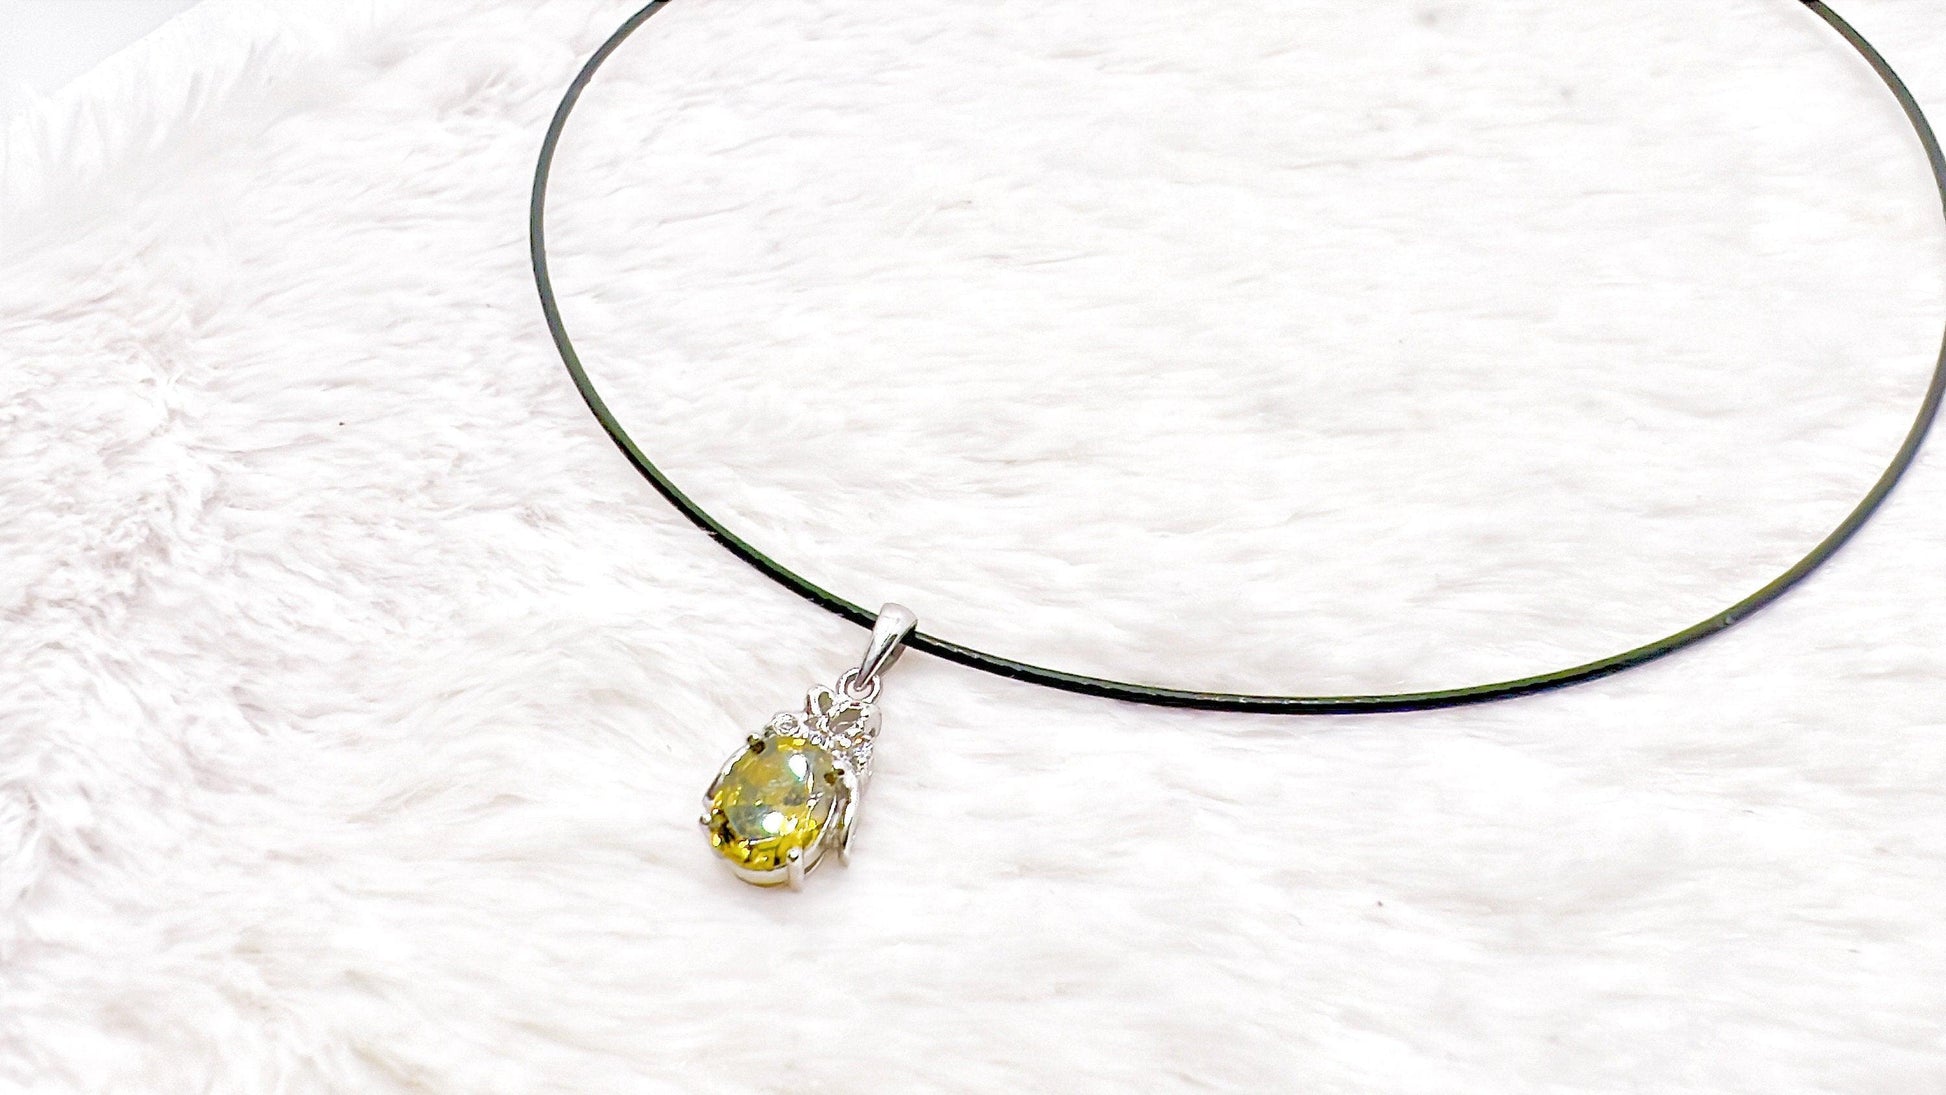 Peridot Necklace, August Birthstone Necklaces, Minimalist Necklace, Birthstone Jewelry, August Birthday Gift, Peridot Jewelry